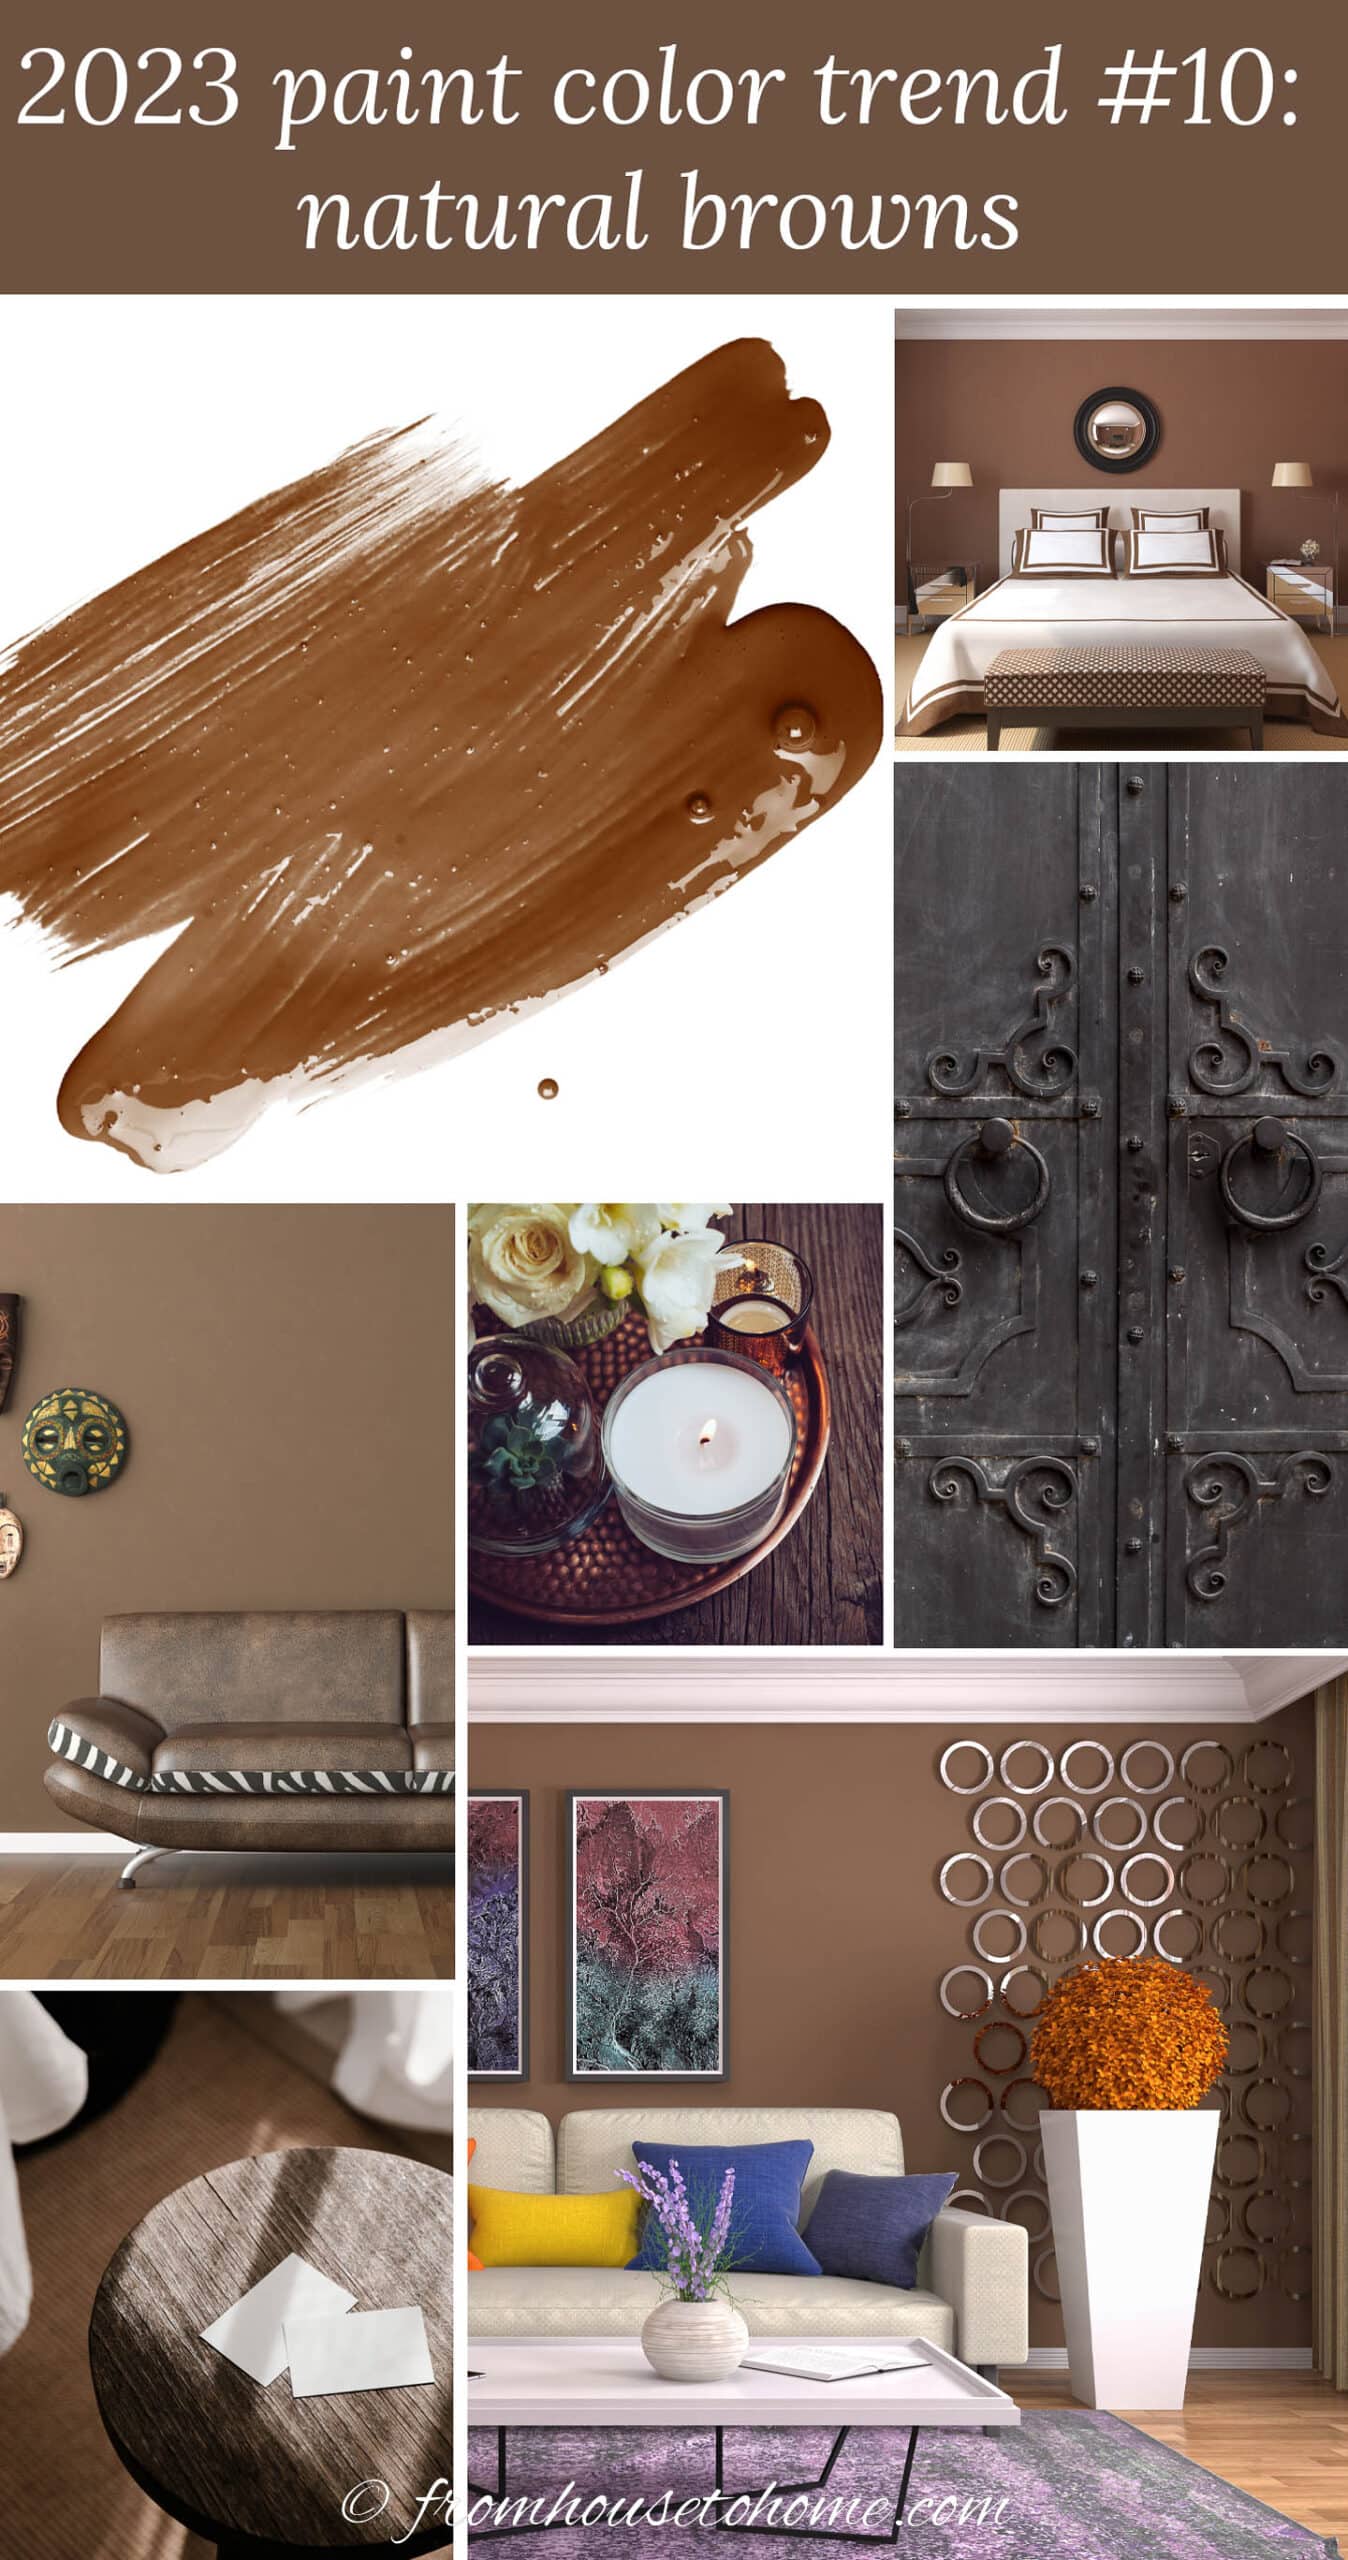 A collage of images using 2023 paint color trend - natural browns